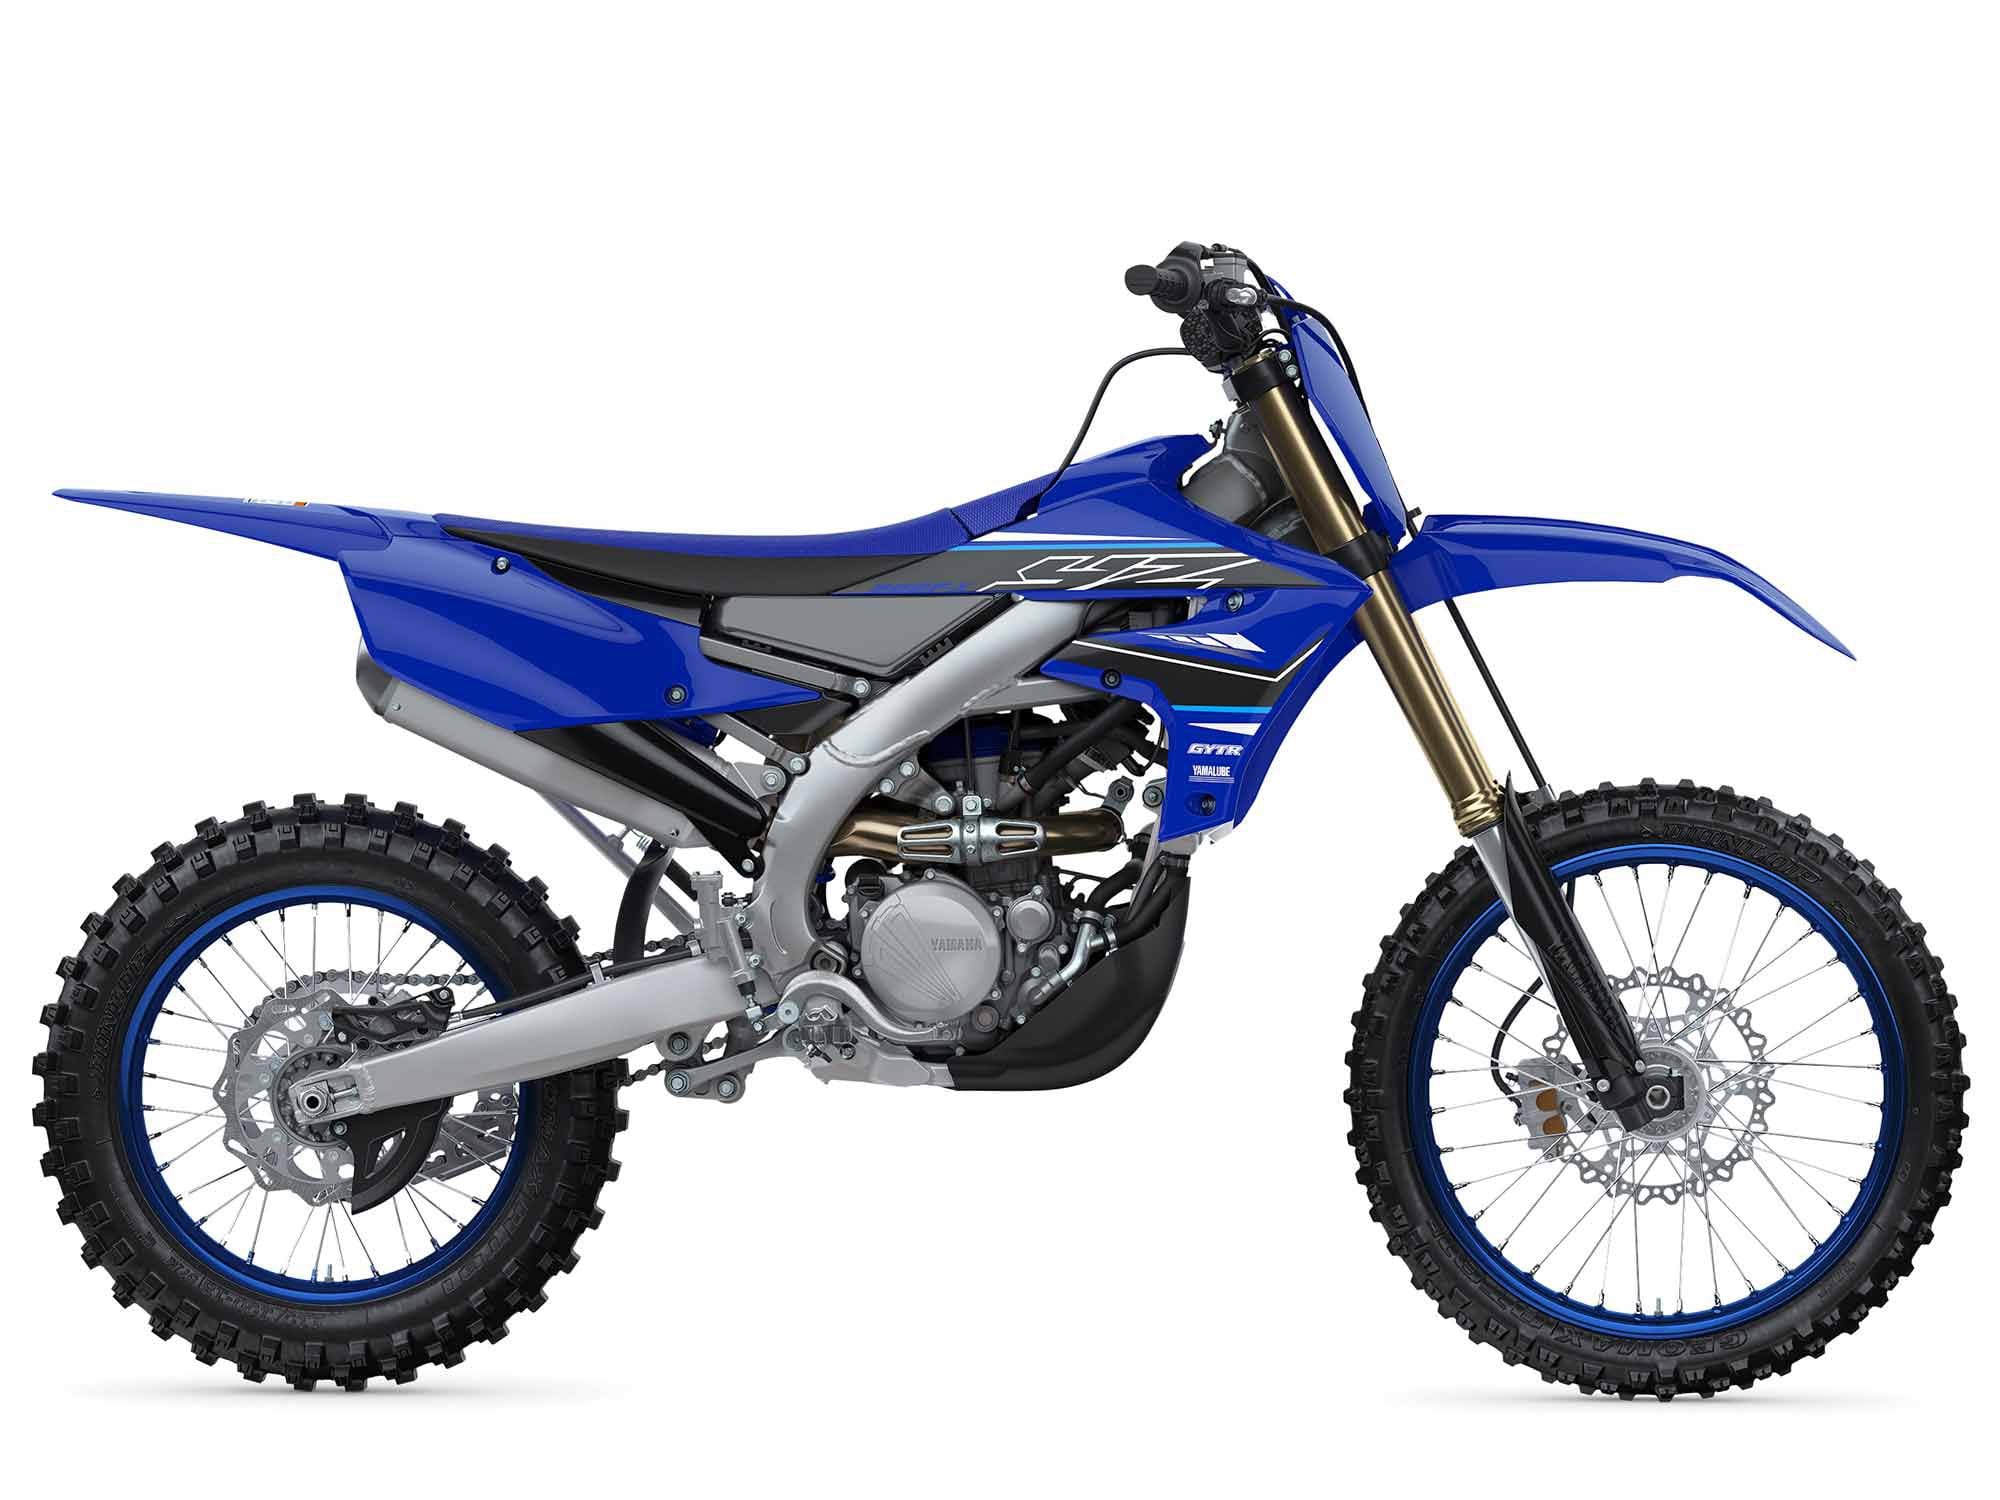 2021 Yamaha YZ250FX Buyer's Guide: Specs, Photos, Price | Cycle World